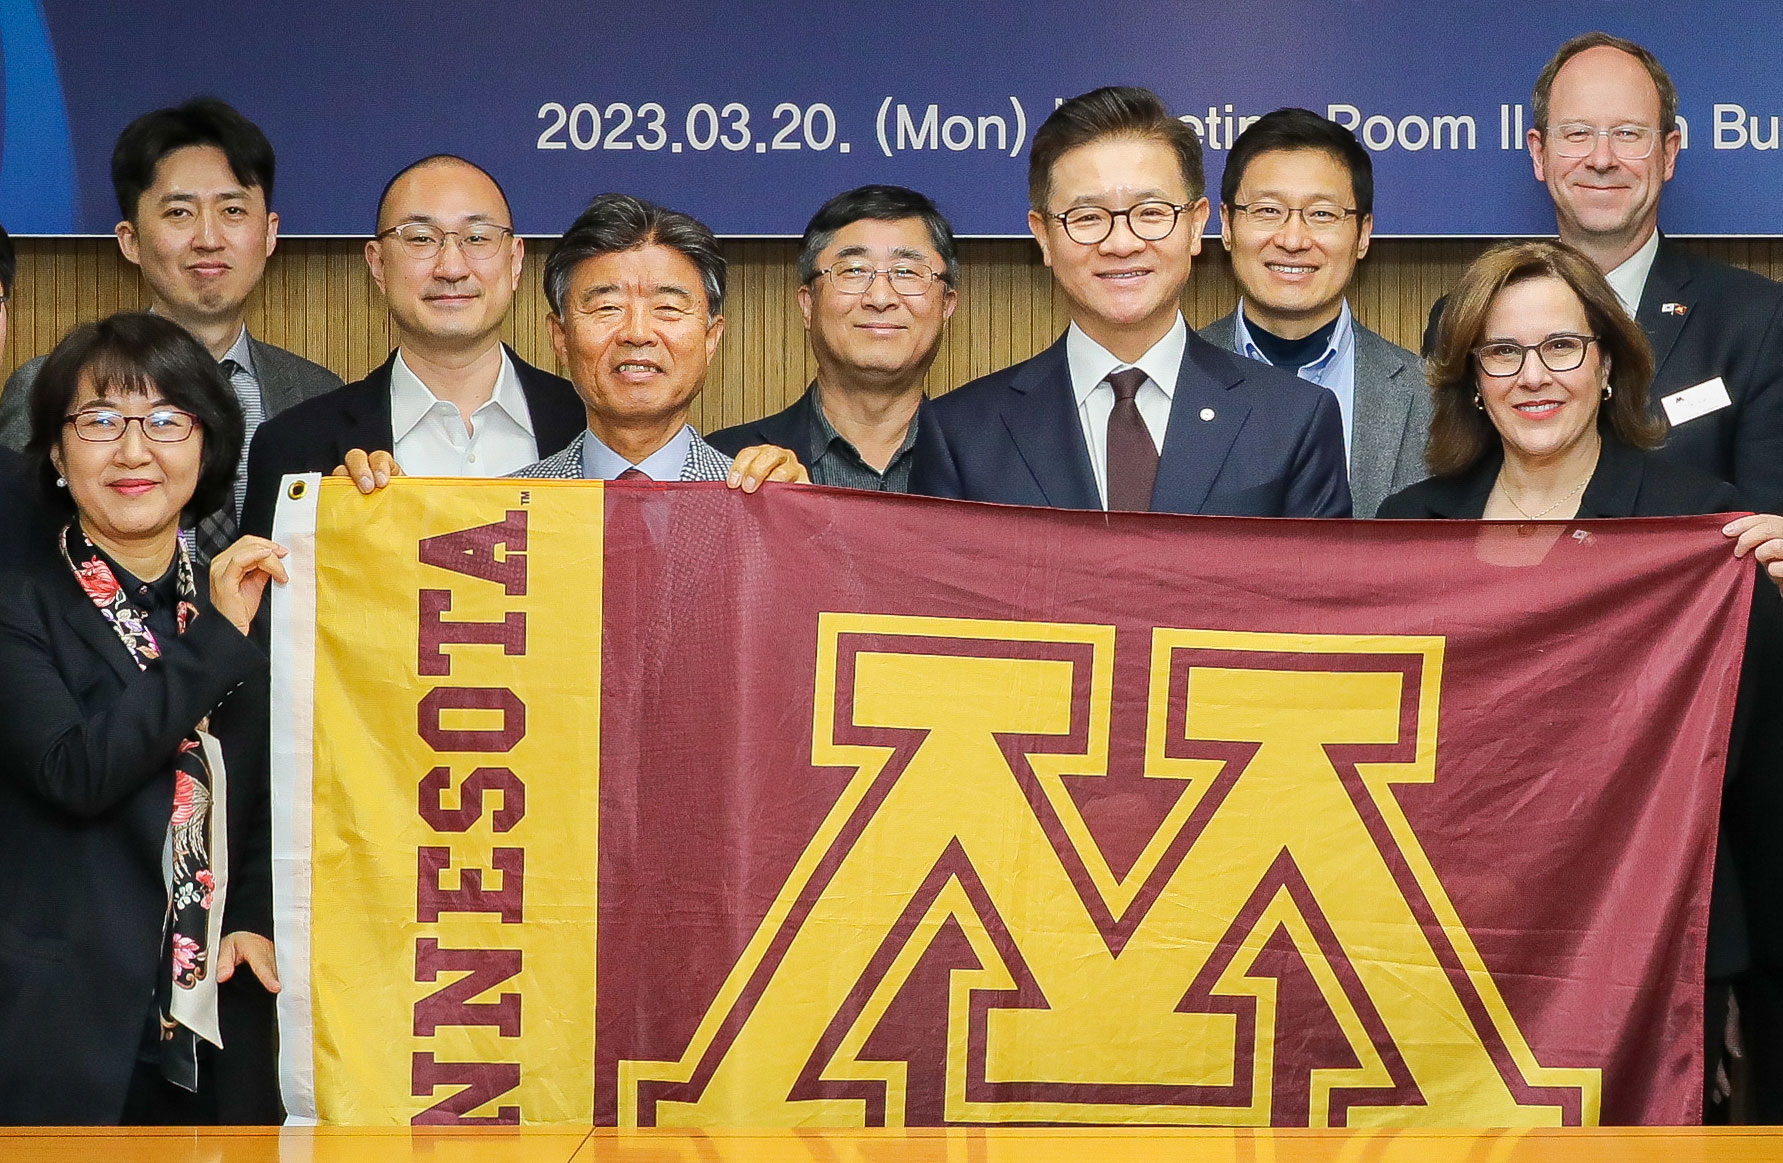 President Gabel posing with Korean colleagues behind a flag with the University of Minnesota logo